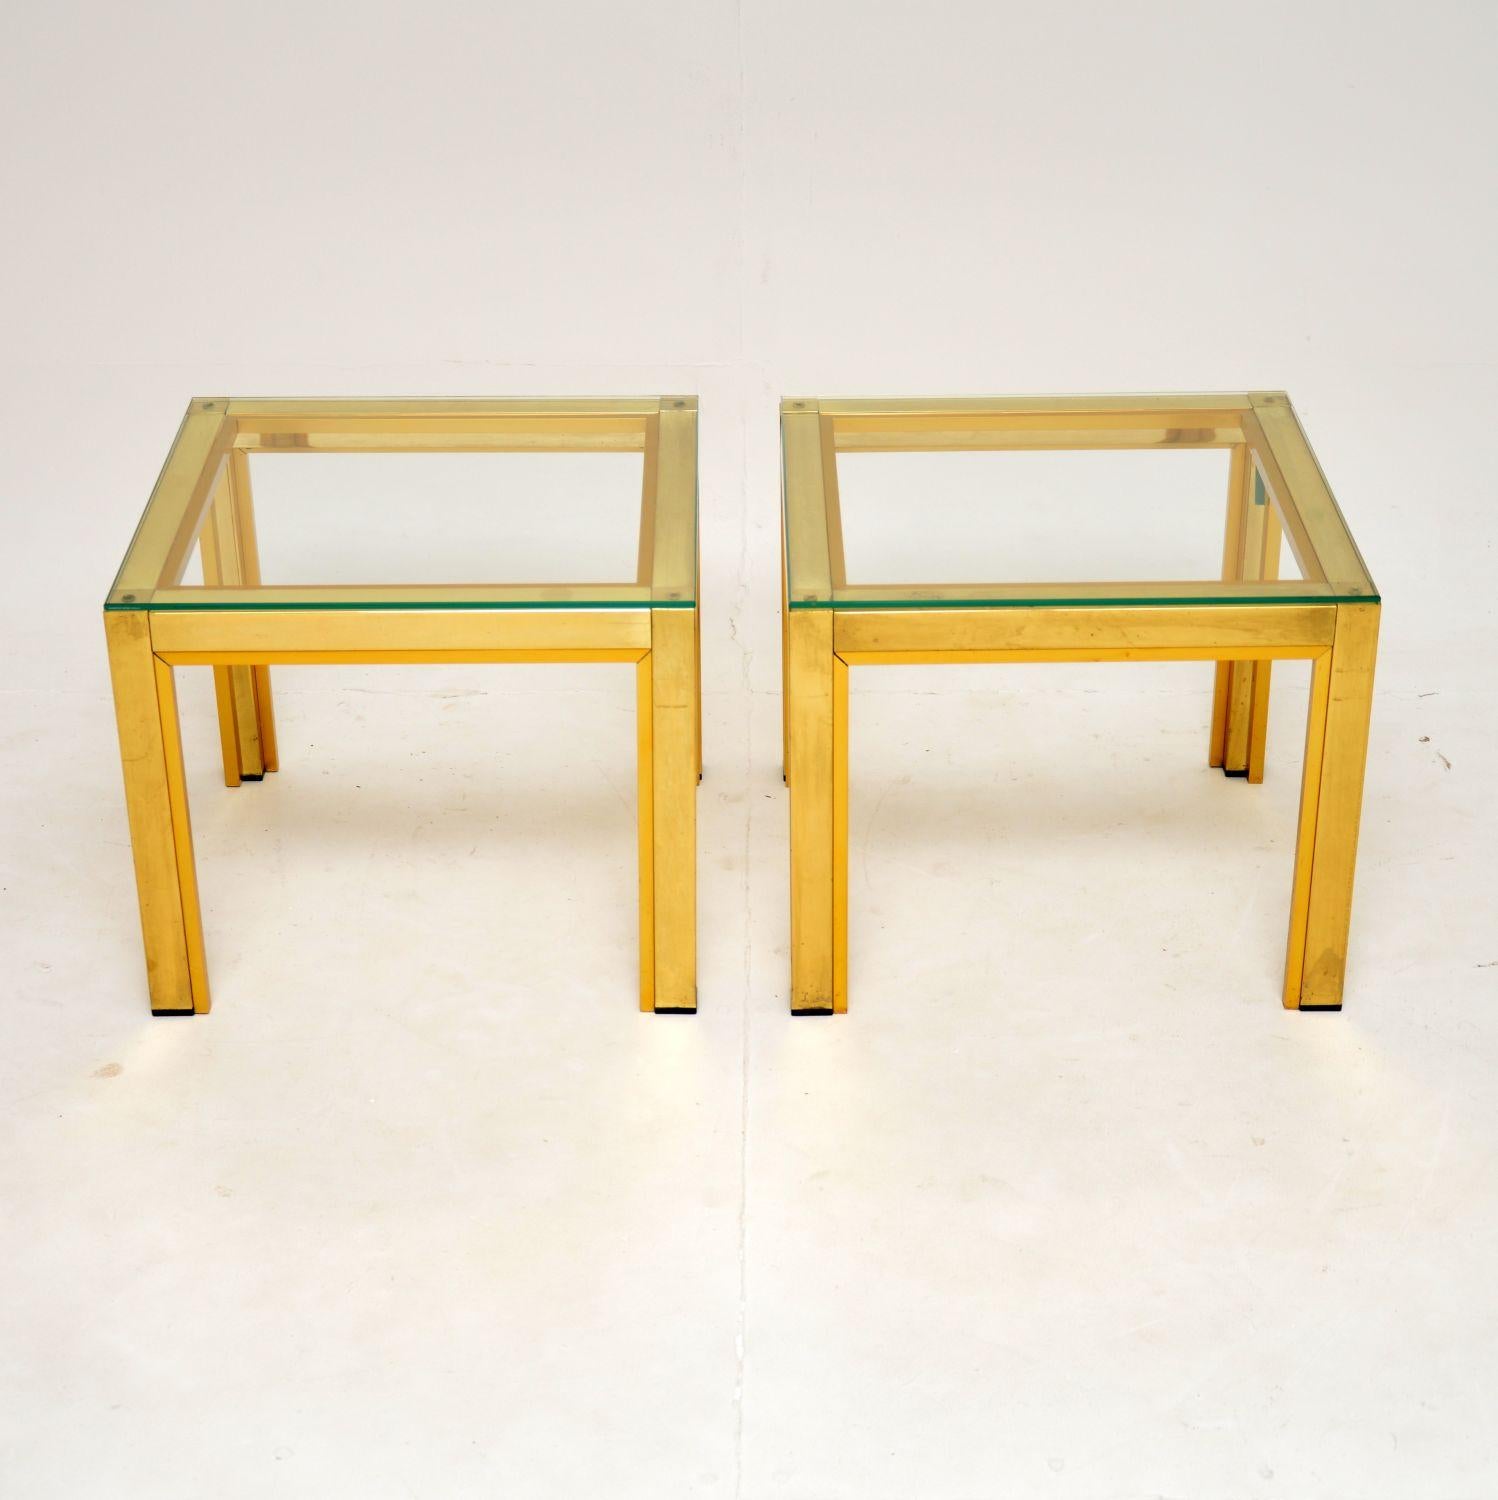 A stylish and very well made vintage 1970’s pair of Italian brass side table by Zevi.

They are of superb quality, with beautifully designed frames of shiny and matt brass finish. They are a lovely size and are nicely finished on all sides.

The